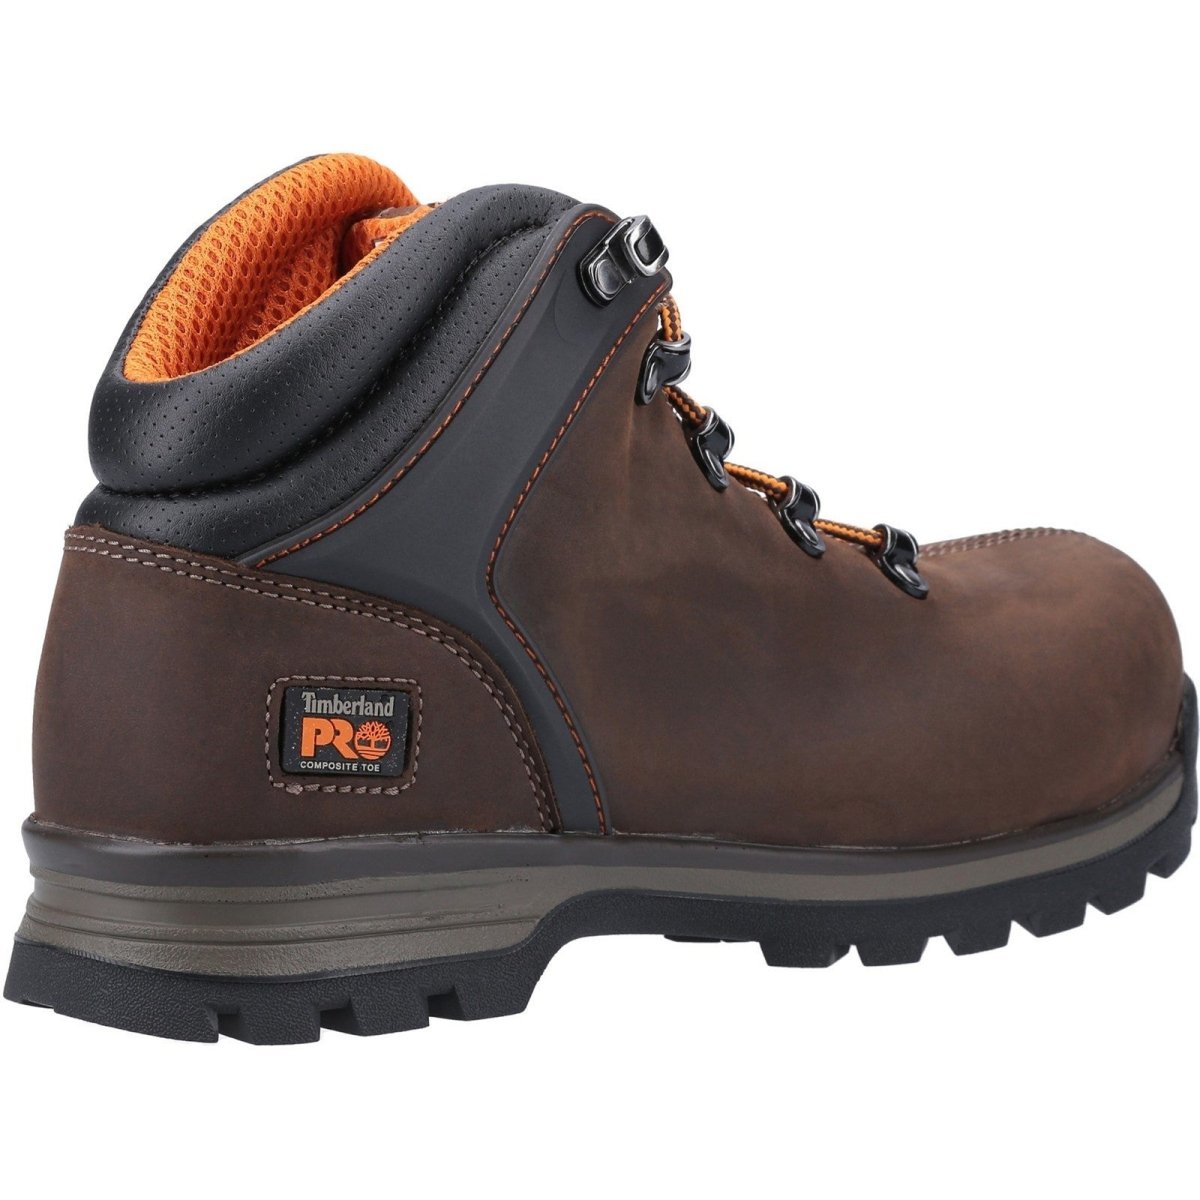 Timberland Pro Splitrock XT Composite Safety Toe Work Boot - Shoe Store Direct